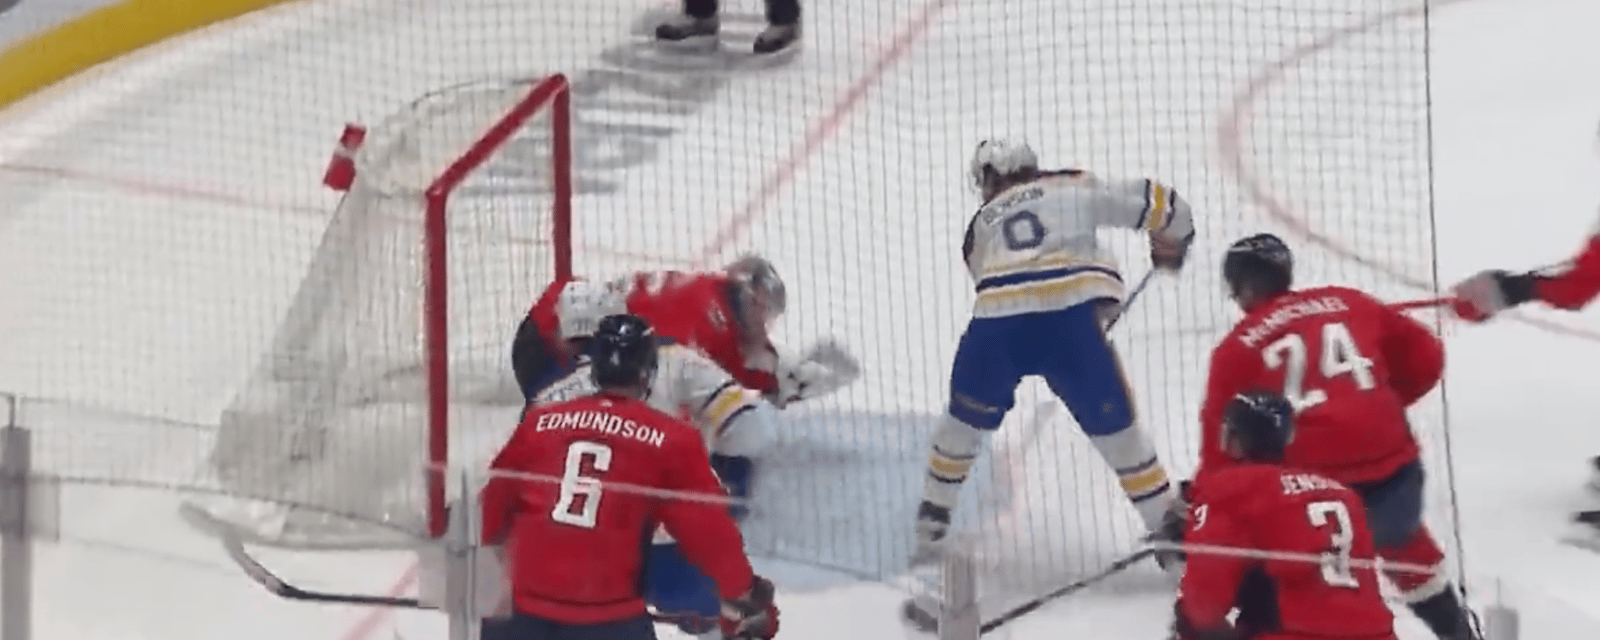 Buffalo's Zach Benson scores the best 1st NHL goal you'll ever see 